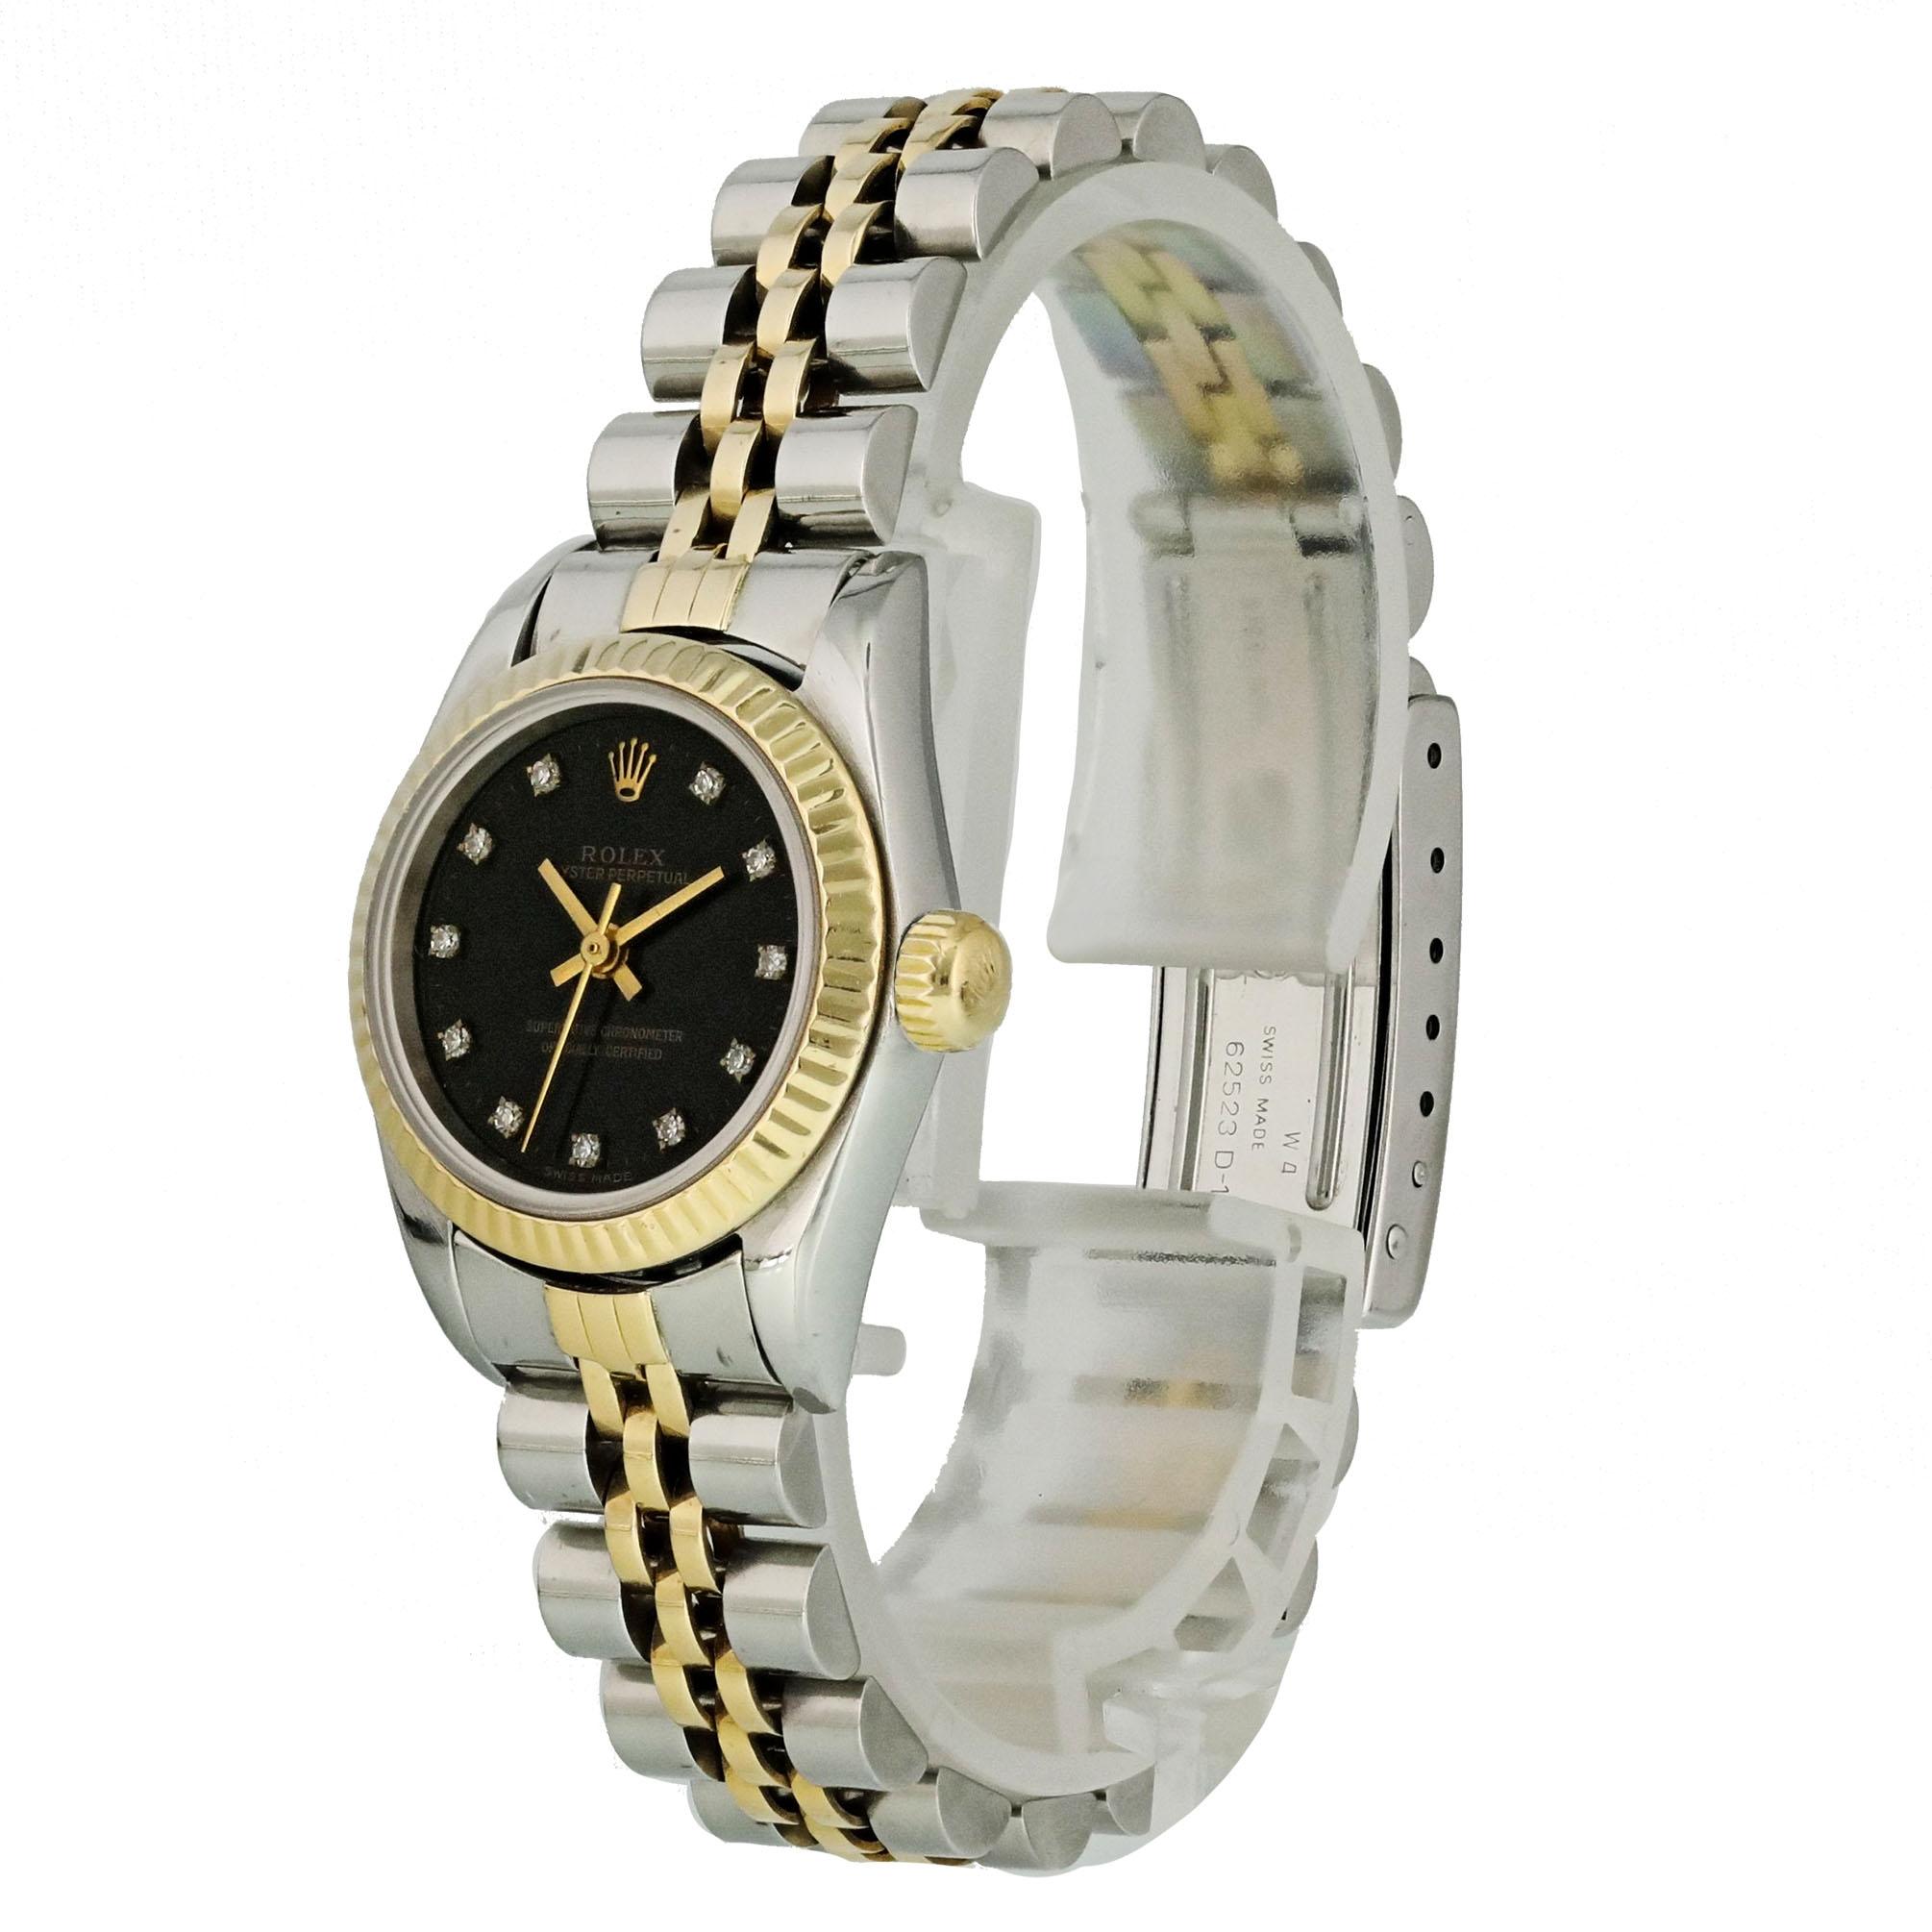 Rolex Oyster Perpetual 67193 Ladies Watch. 
24mm Stainless Steel case. 
Yellow Gold Stationary bezel. 
Black dial with gold hands and factory set diamond hour markers. 
Minute markers on the outer dial. 
Stainless Steel Bracelet with Fold Over